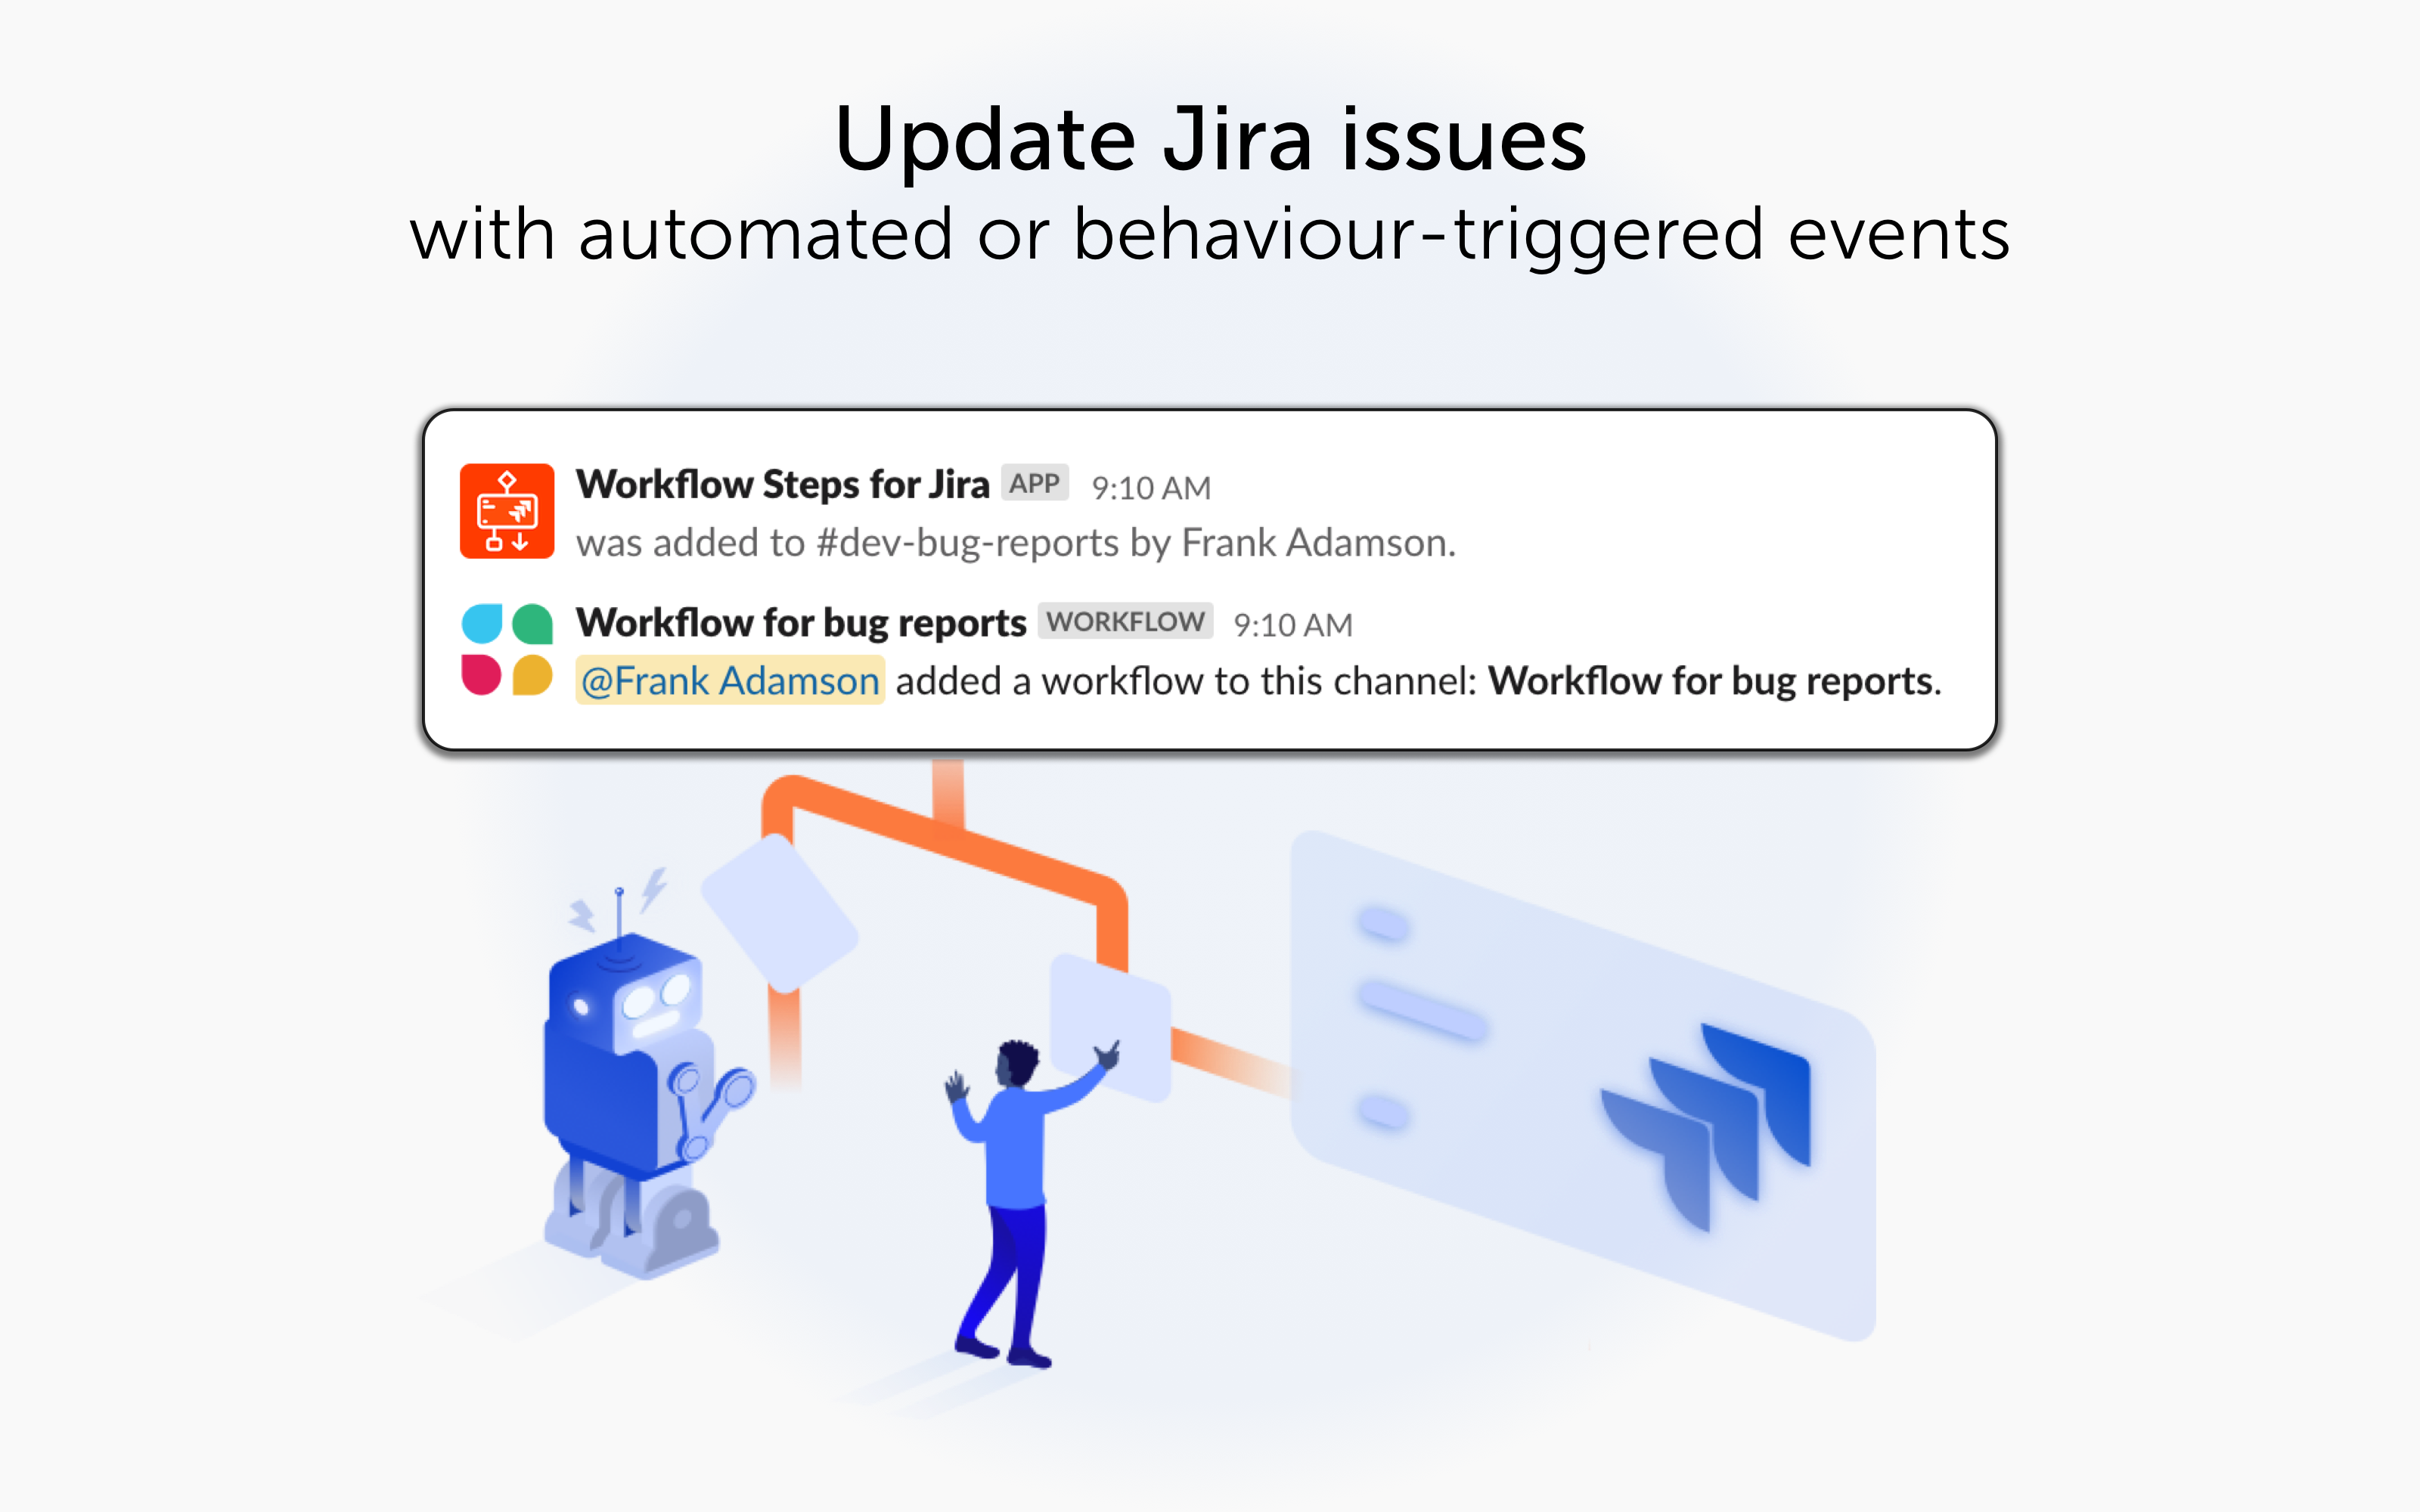 Update Jiea issues with automated or behaviour-triggered events. An illustration of a workflow with two branches, one leading to a gentleman creating a Jira issue, the other leading to a friendly robot.